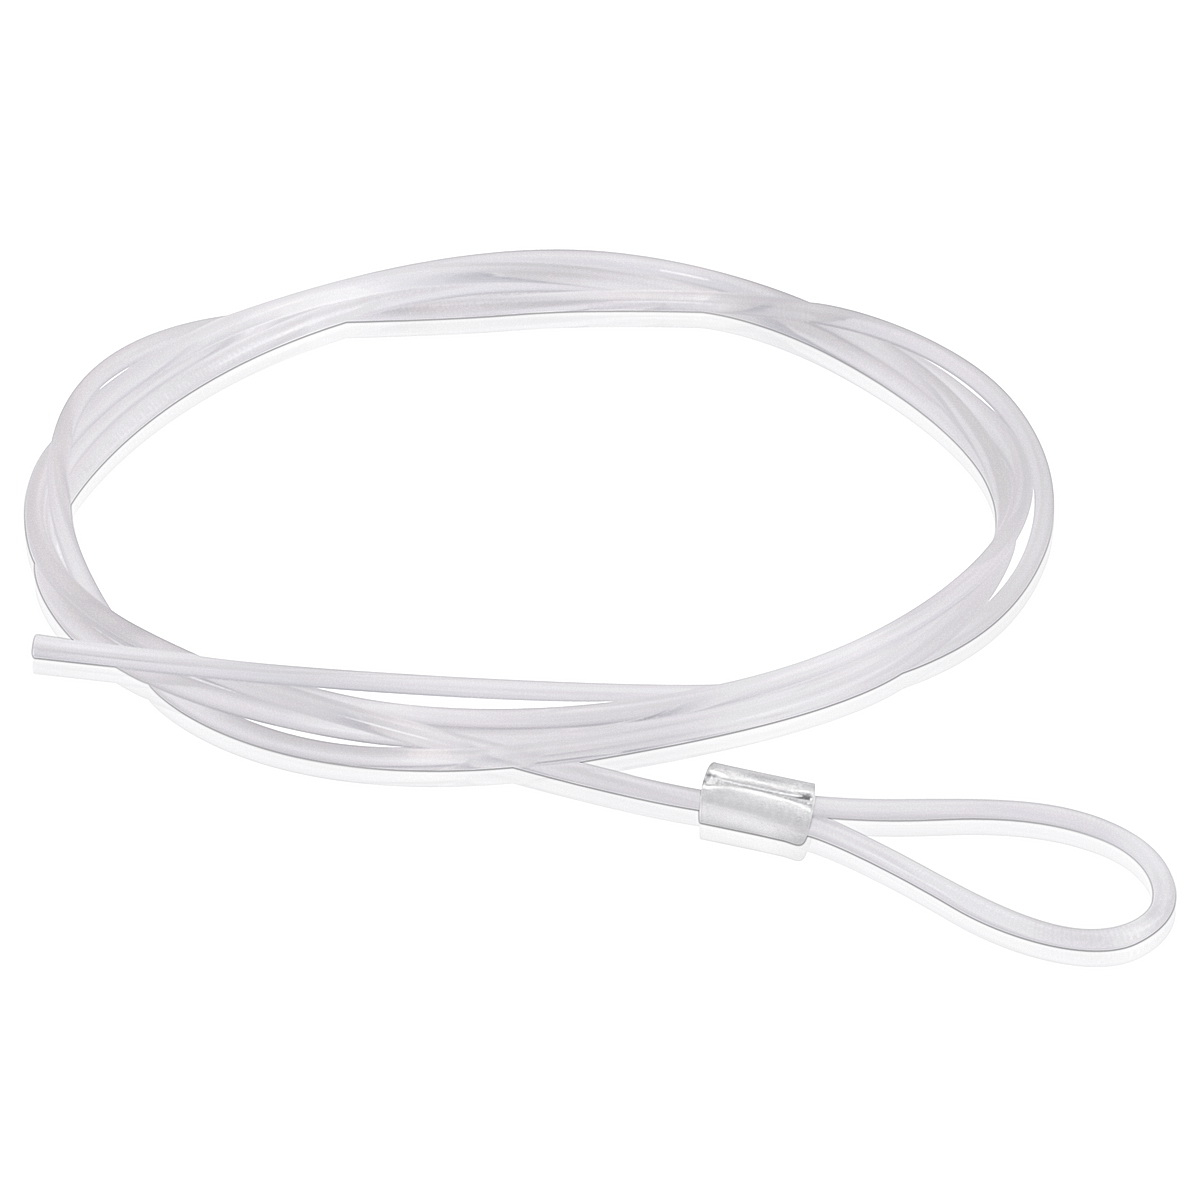 Suspended Kit, T Clamp, Looped Nylon Cable - 120'', Hook - 1/16'' Diameter Cable